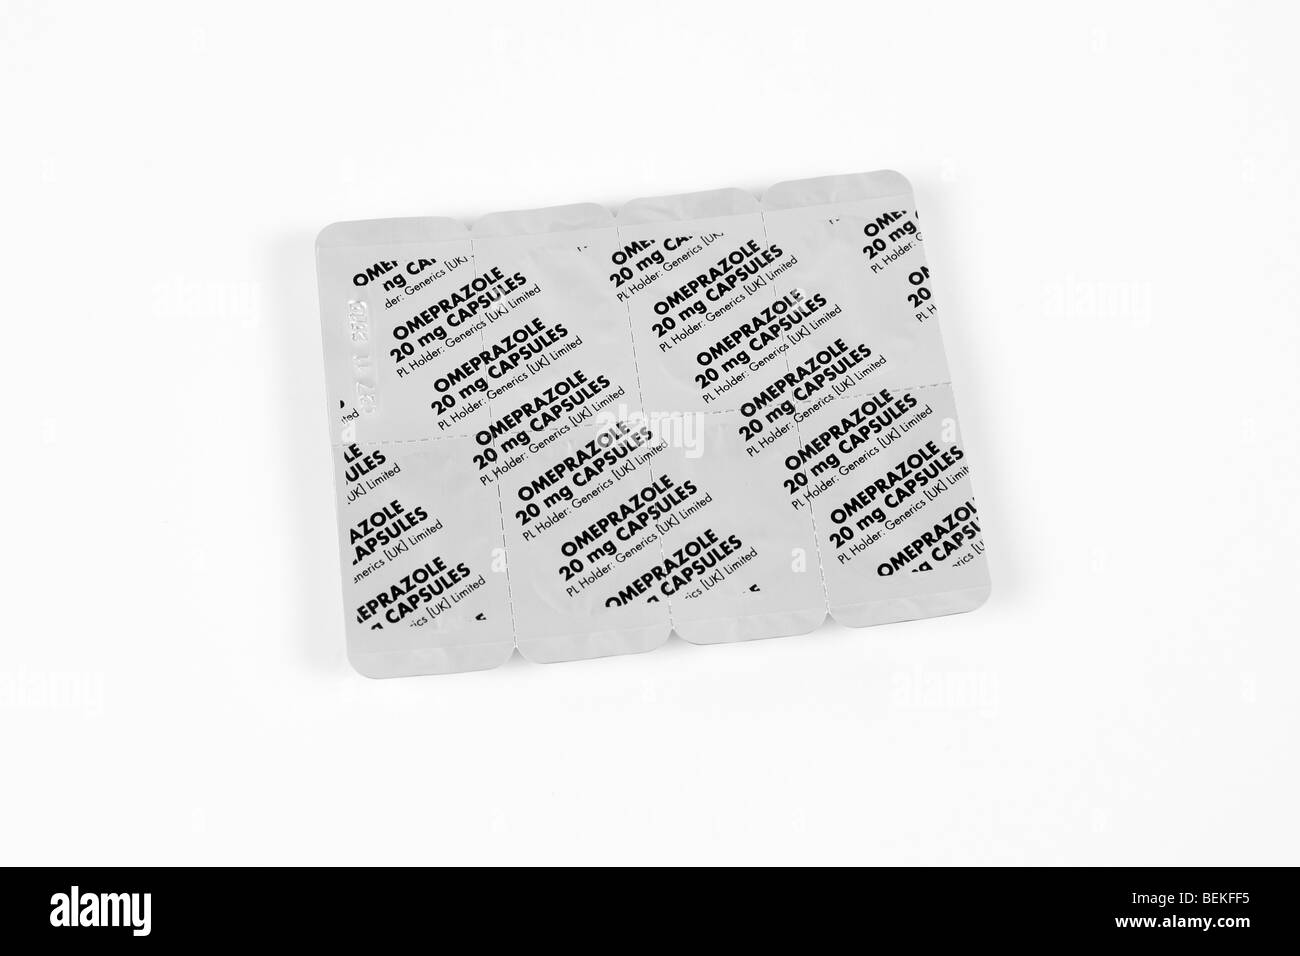 Blister packs of Omeprazole Gastro-Resistant Capsules used to treat Ulcers Stock Photo